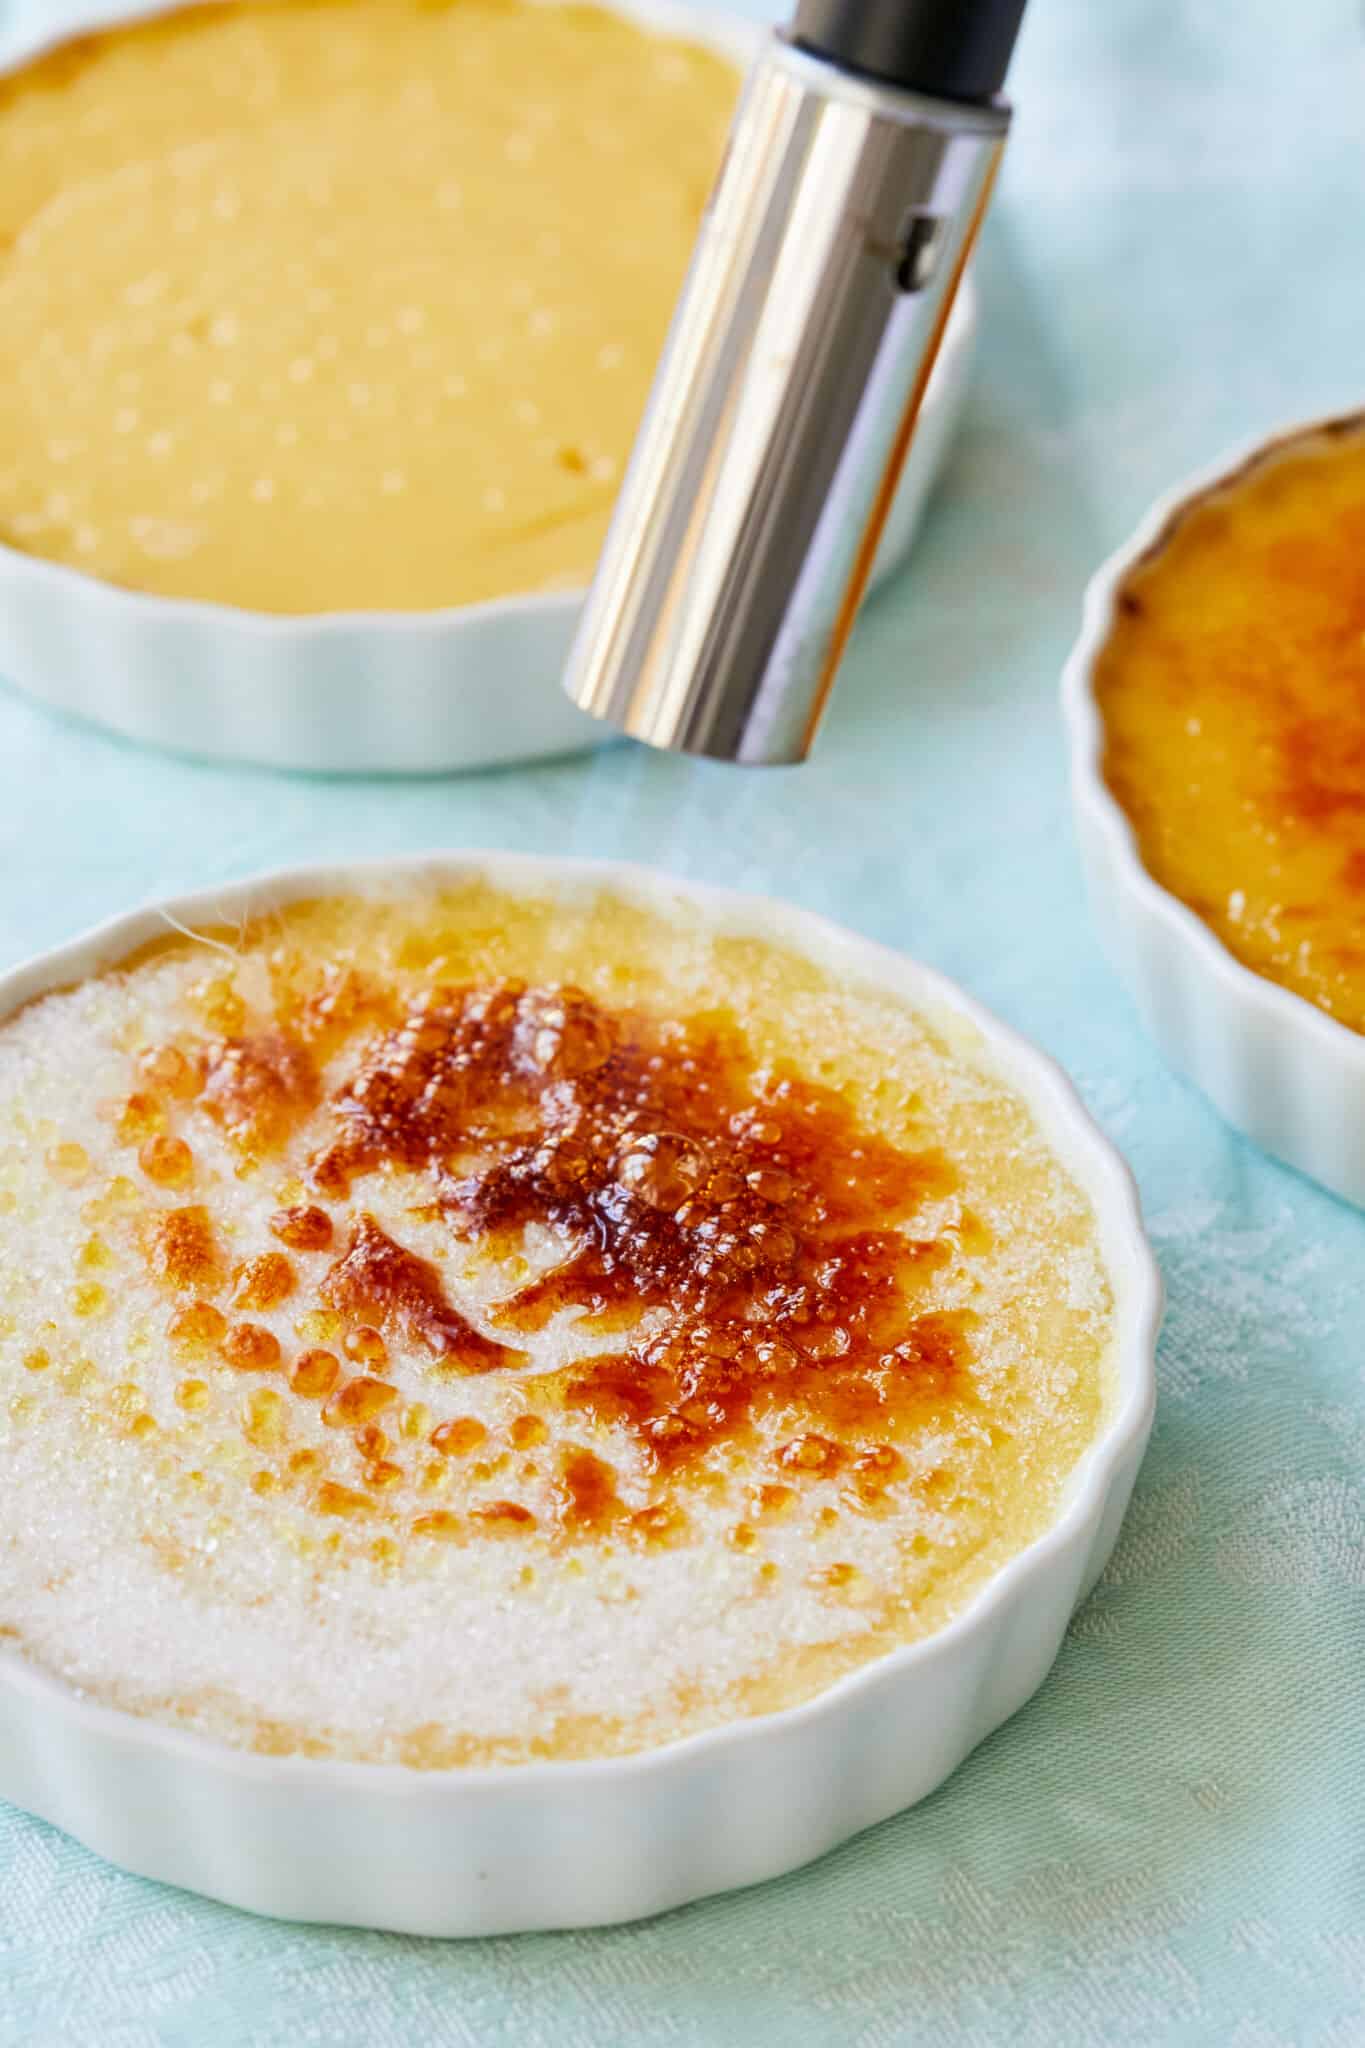 Step-by-step instruction on how to make Passion Fruit Crème Brûlée: Using a kitchen torch, caramelize the sugar until brown and bubbly. Let cool for a few minutes before serving.